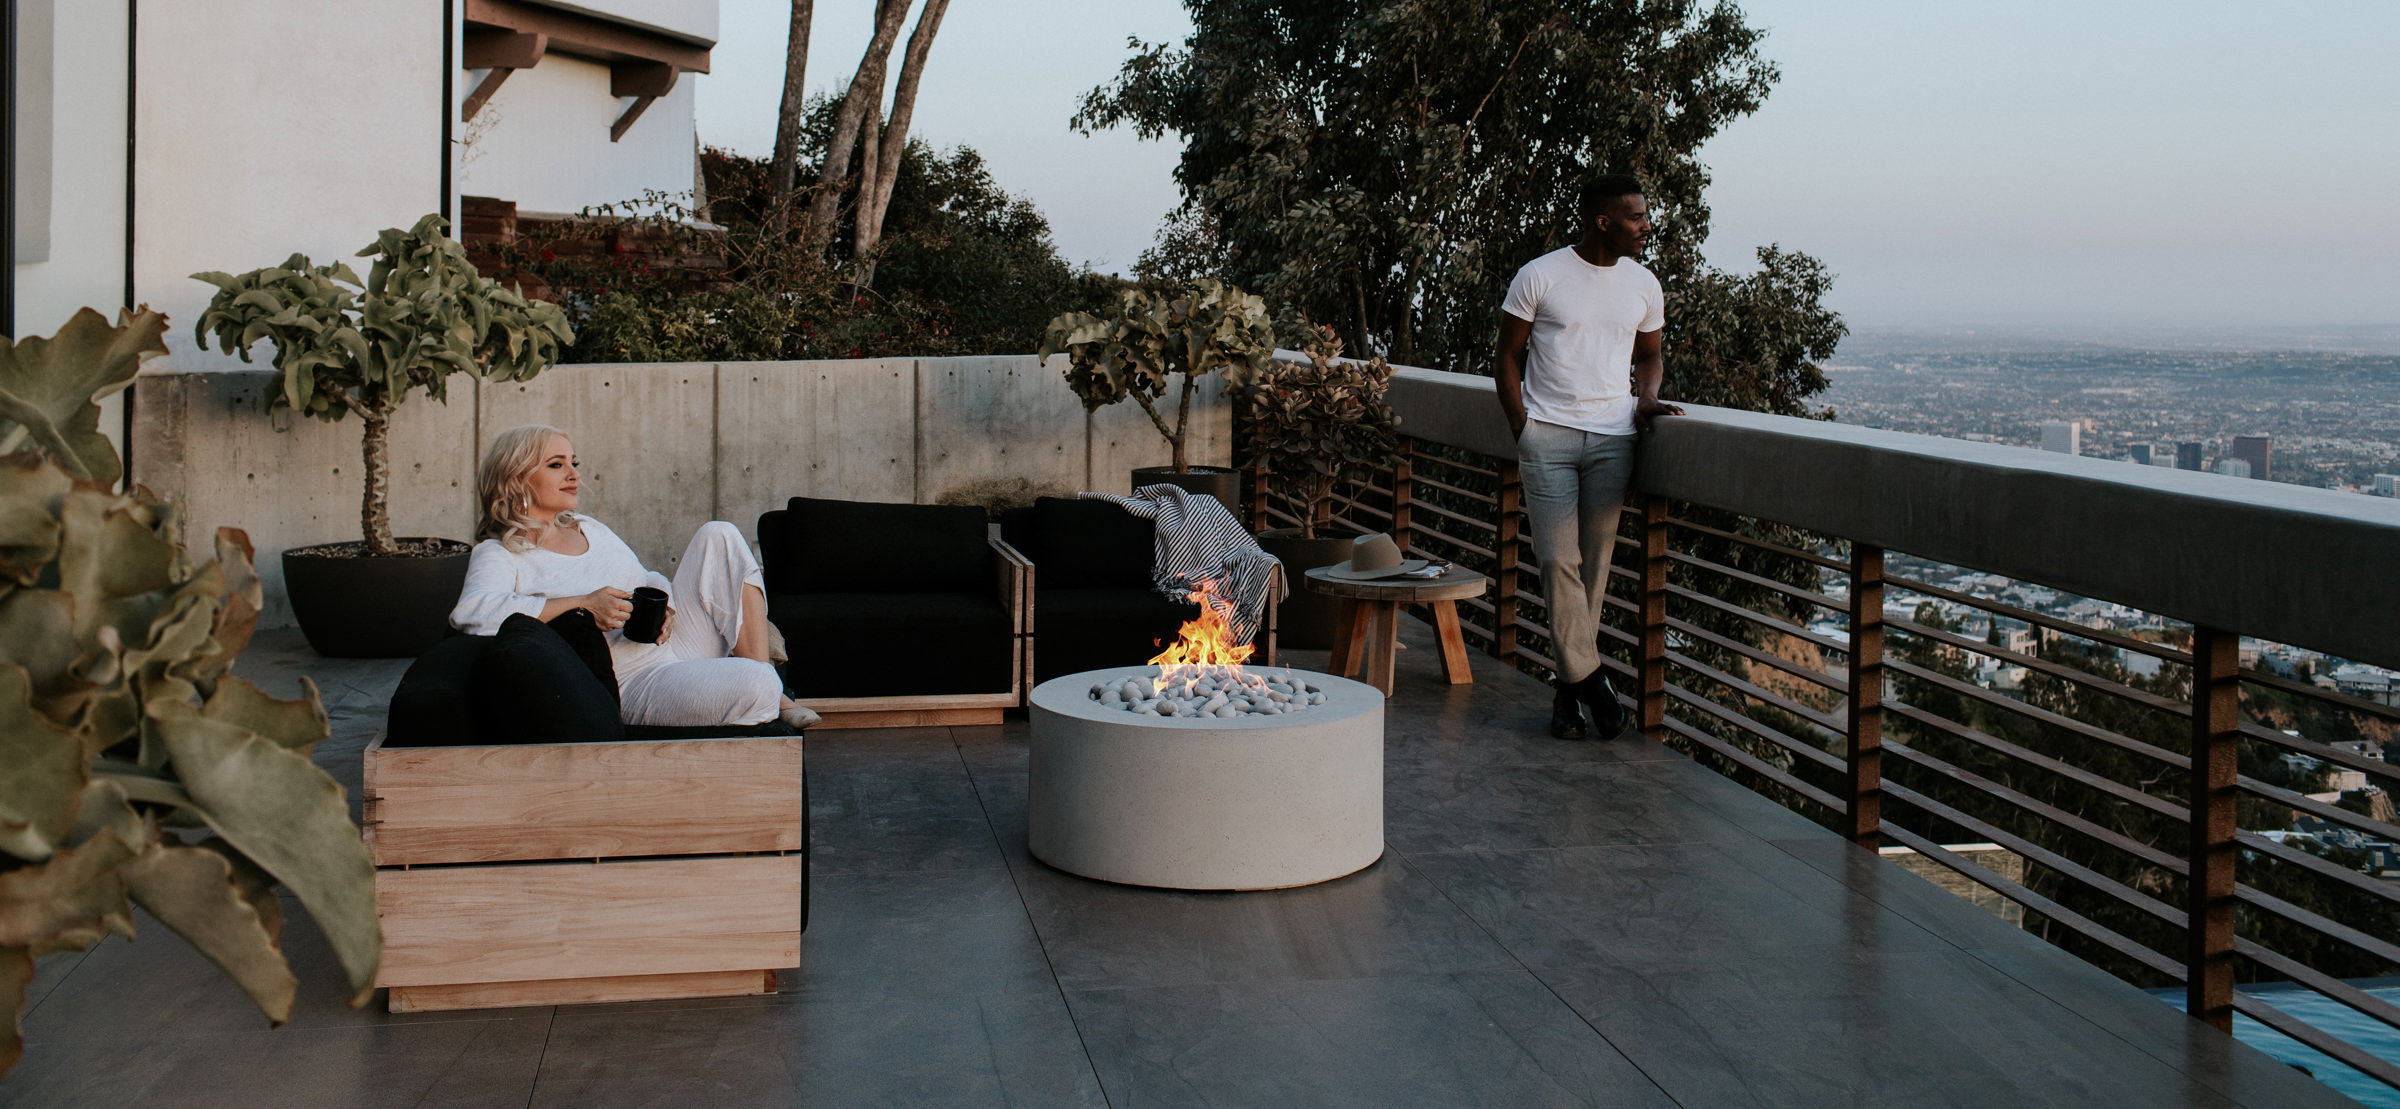 Concrete Firepits Lightweight And, Balcony Fire Pit